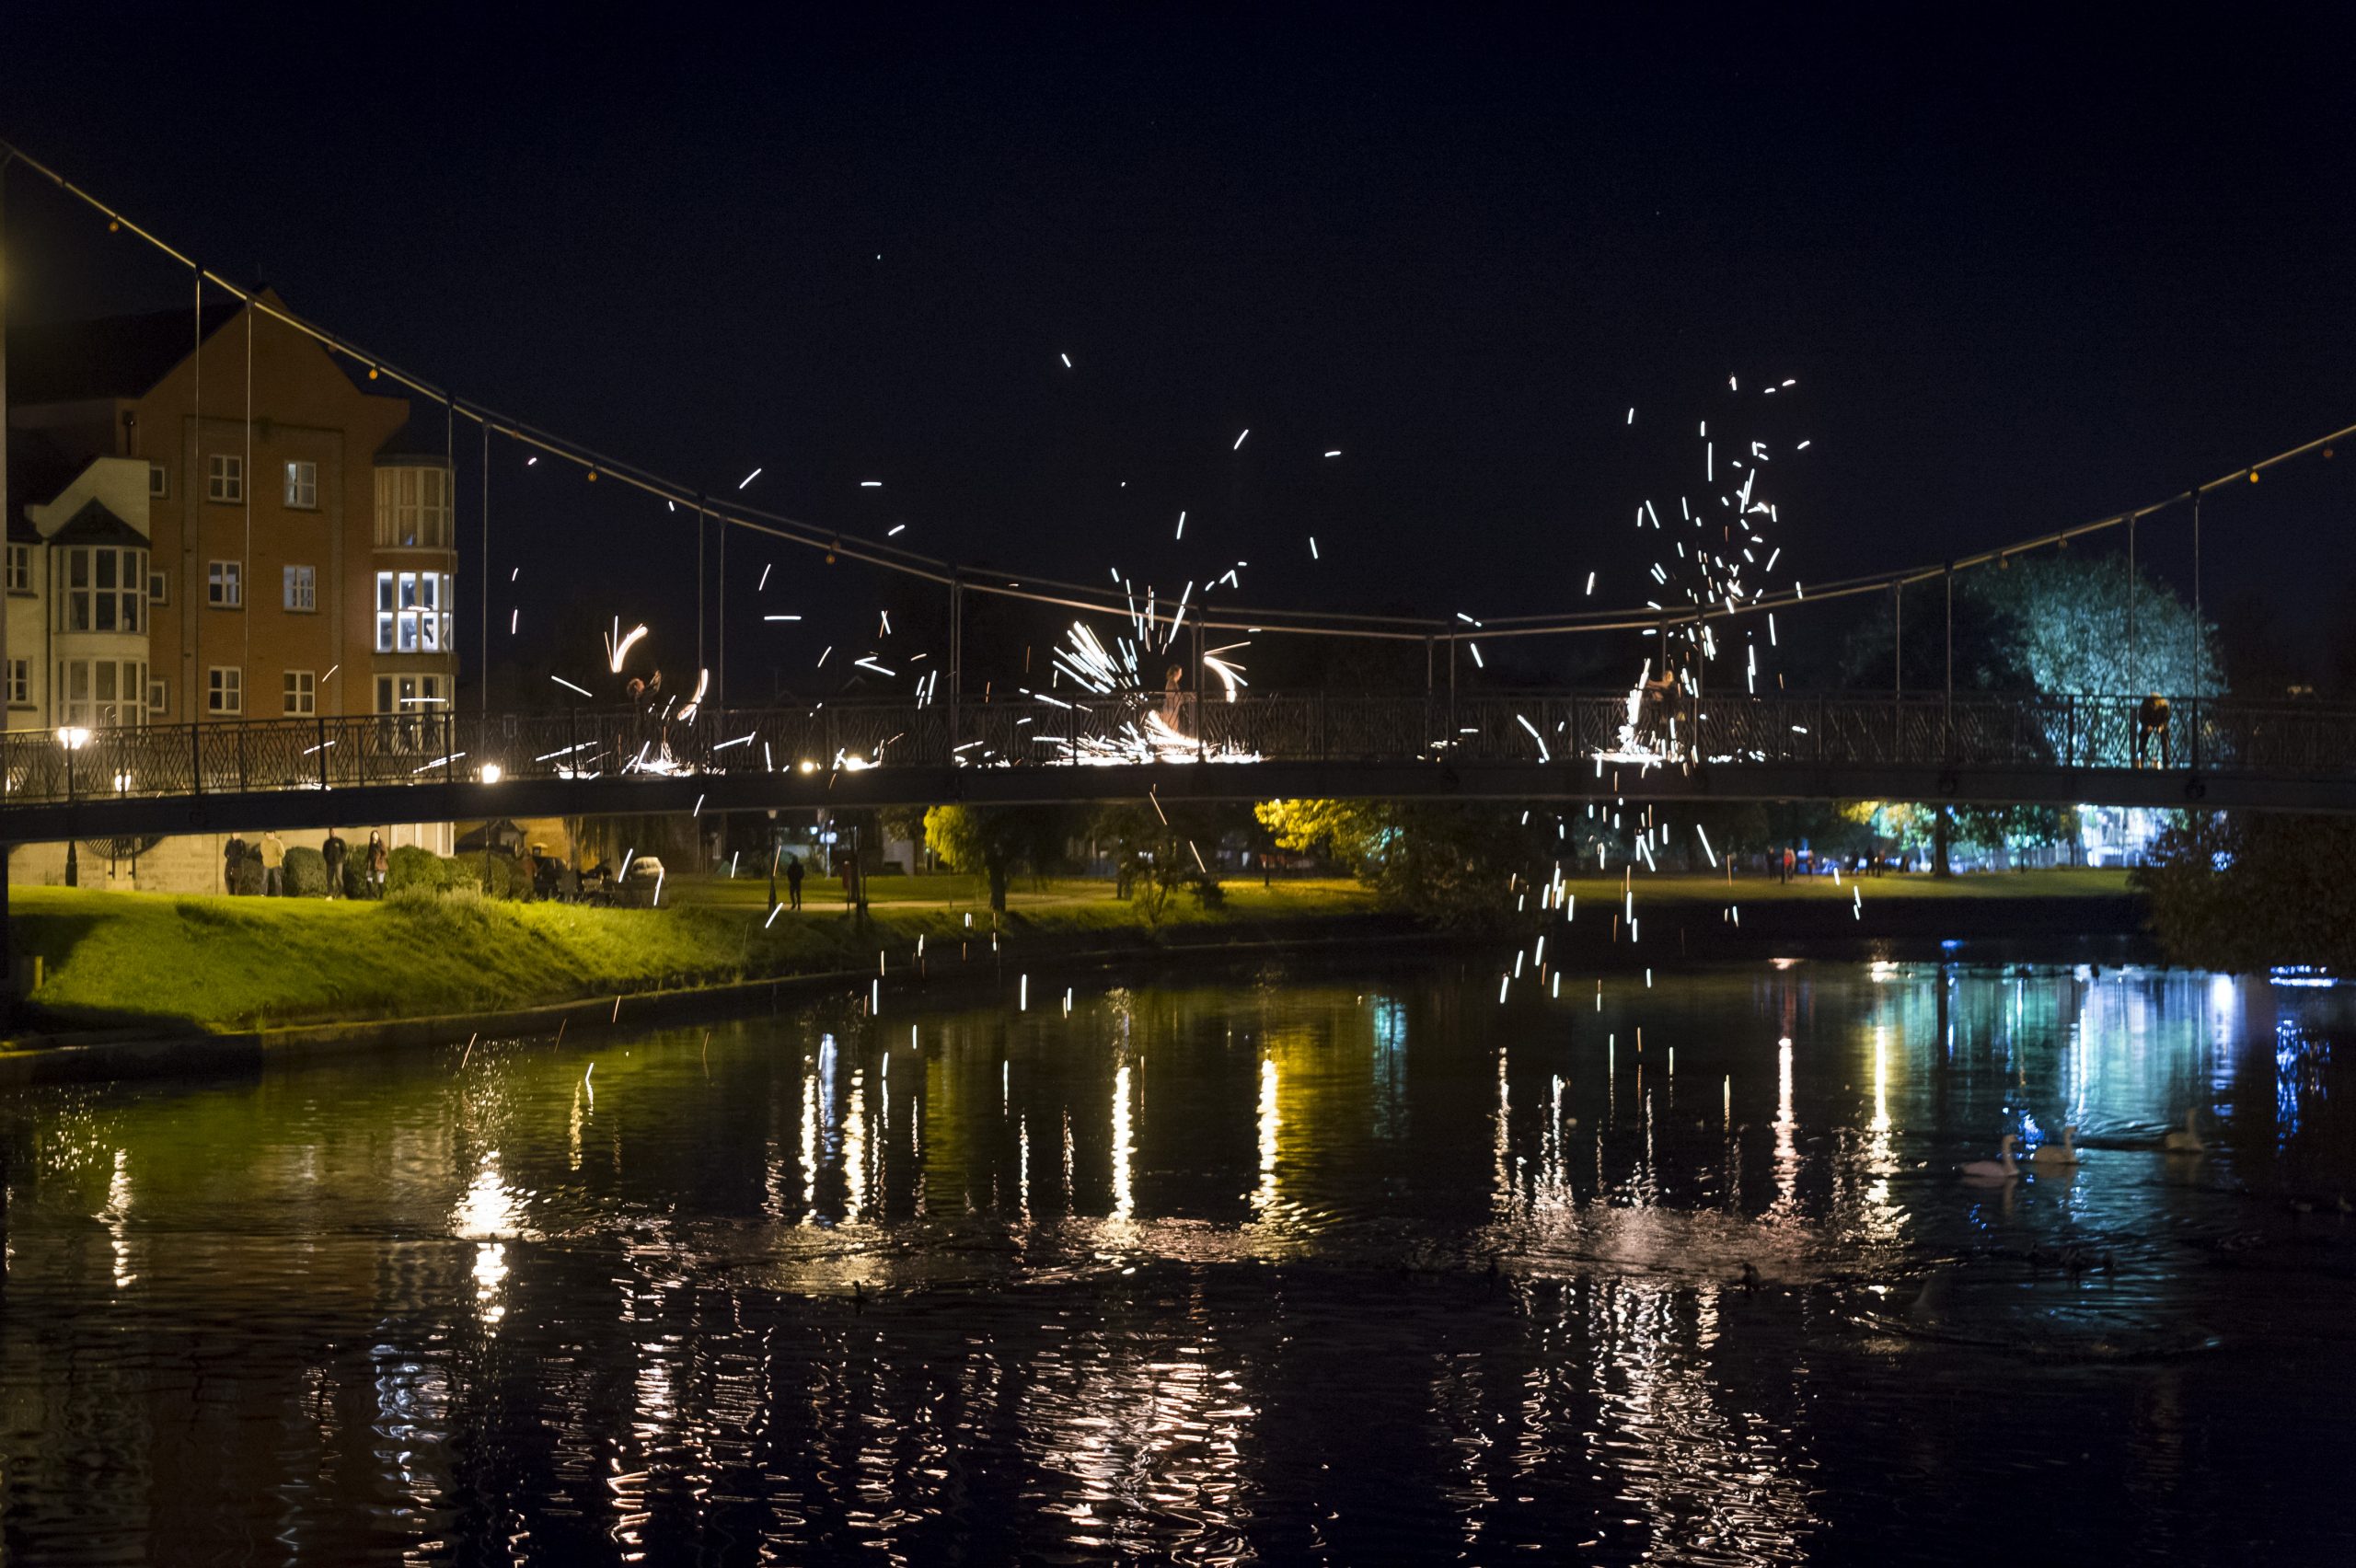 On a bridge over Exeter canal, fire spinners perform, sparks flying off into the night sky.